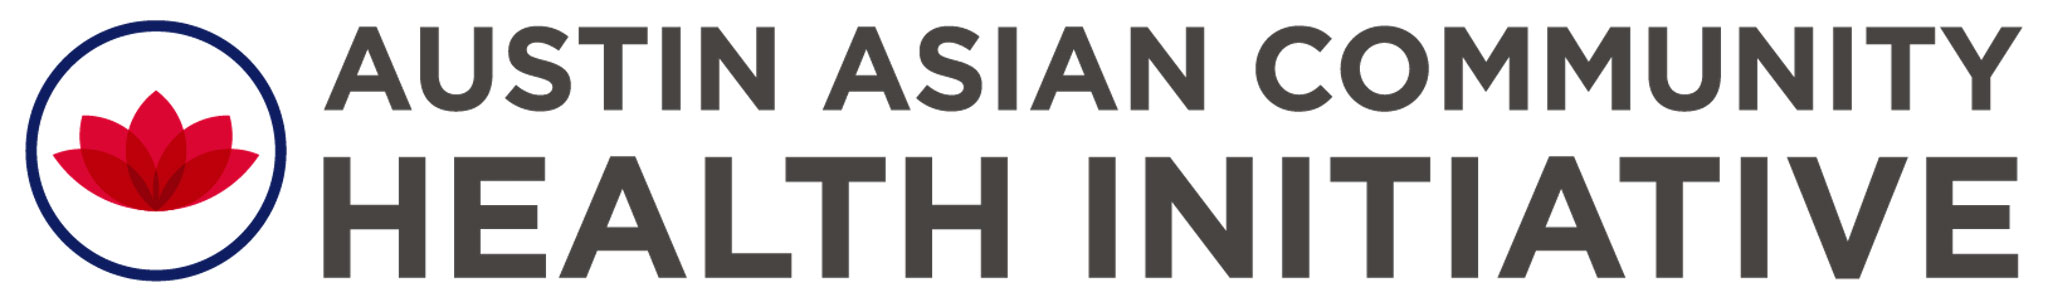 Check out Austin Asian Community Health Initiative